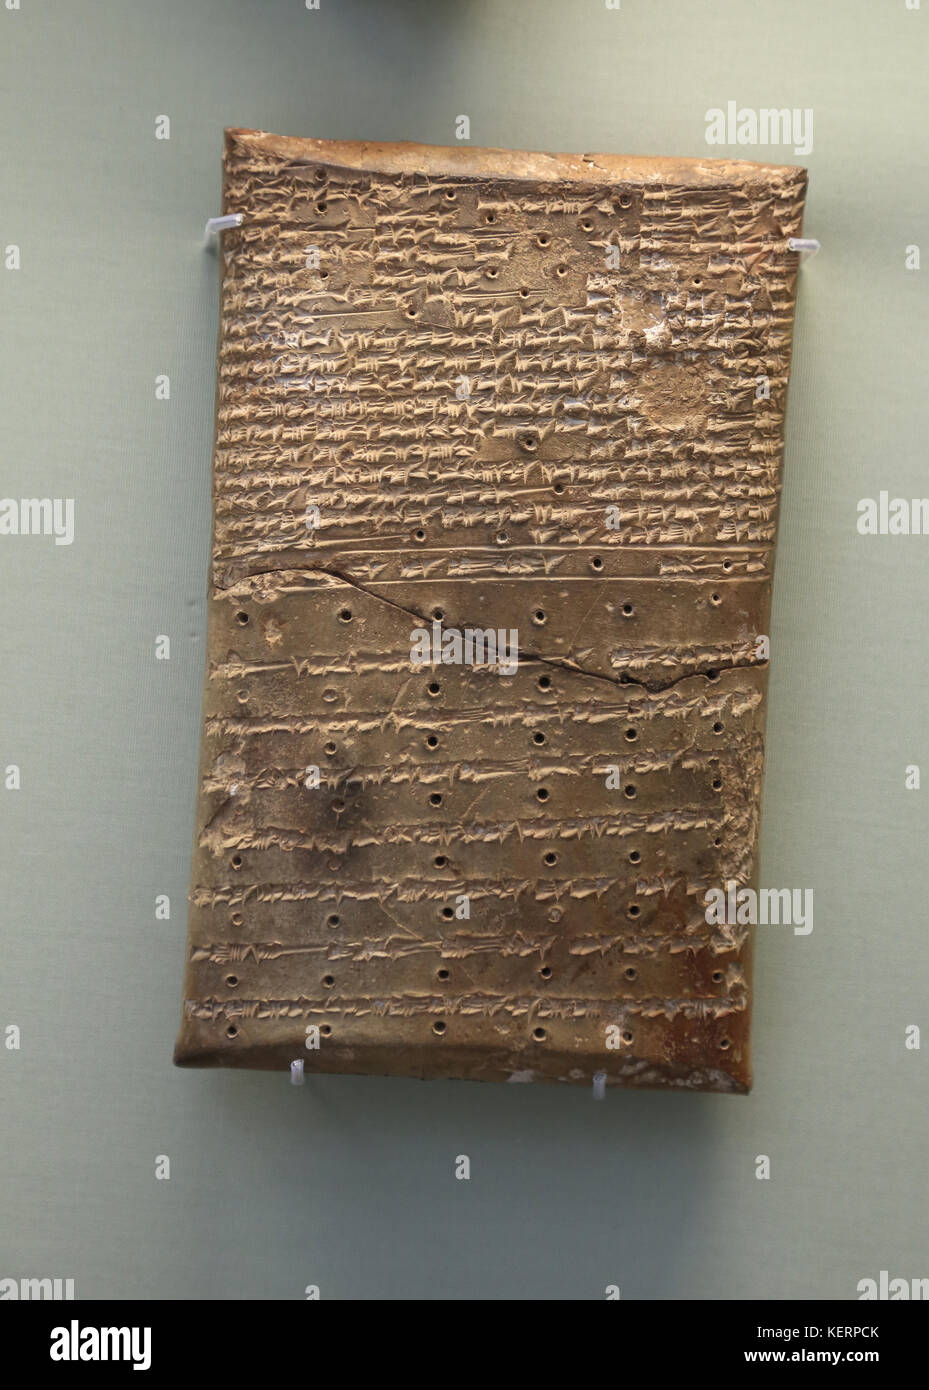 Advice for a prince. Literary text. 700-650 BC. Nineveh, Northern Iraq. Tablet clay. British Museum. London. GBR. Stock Photo